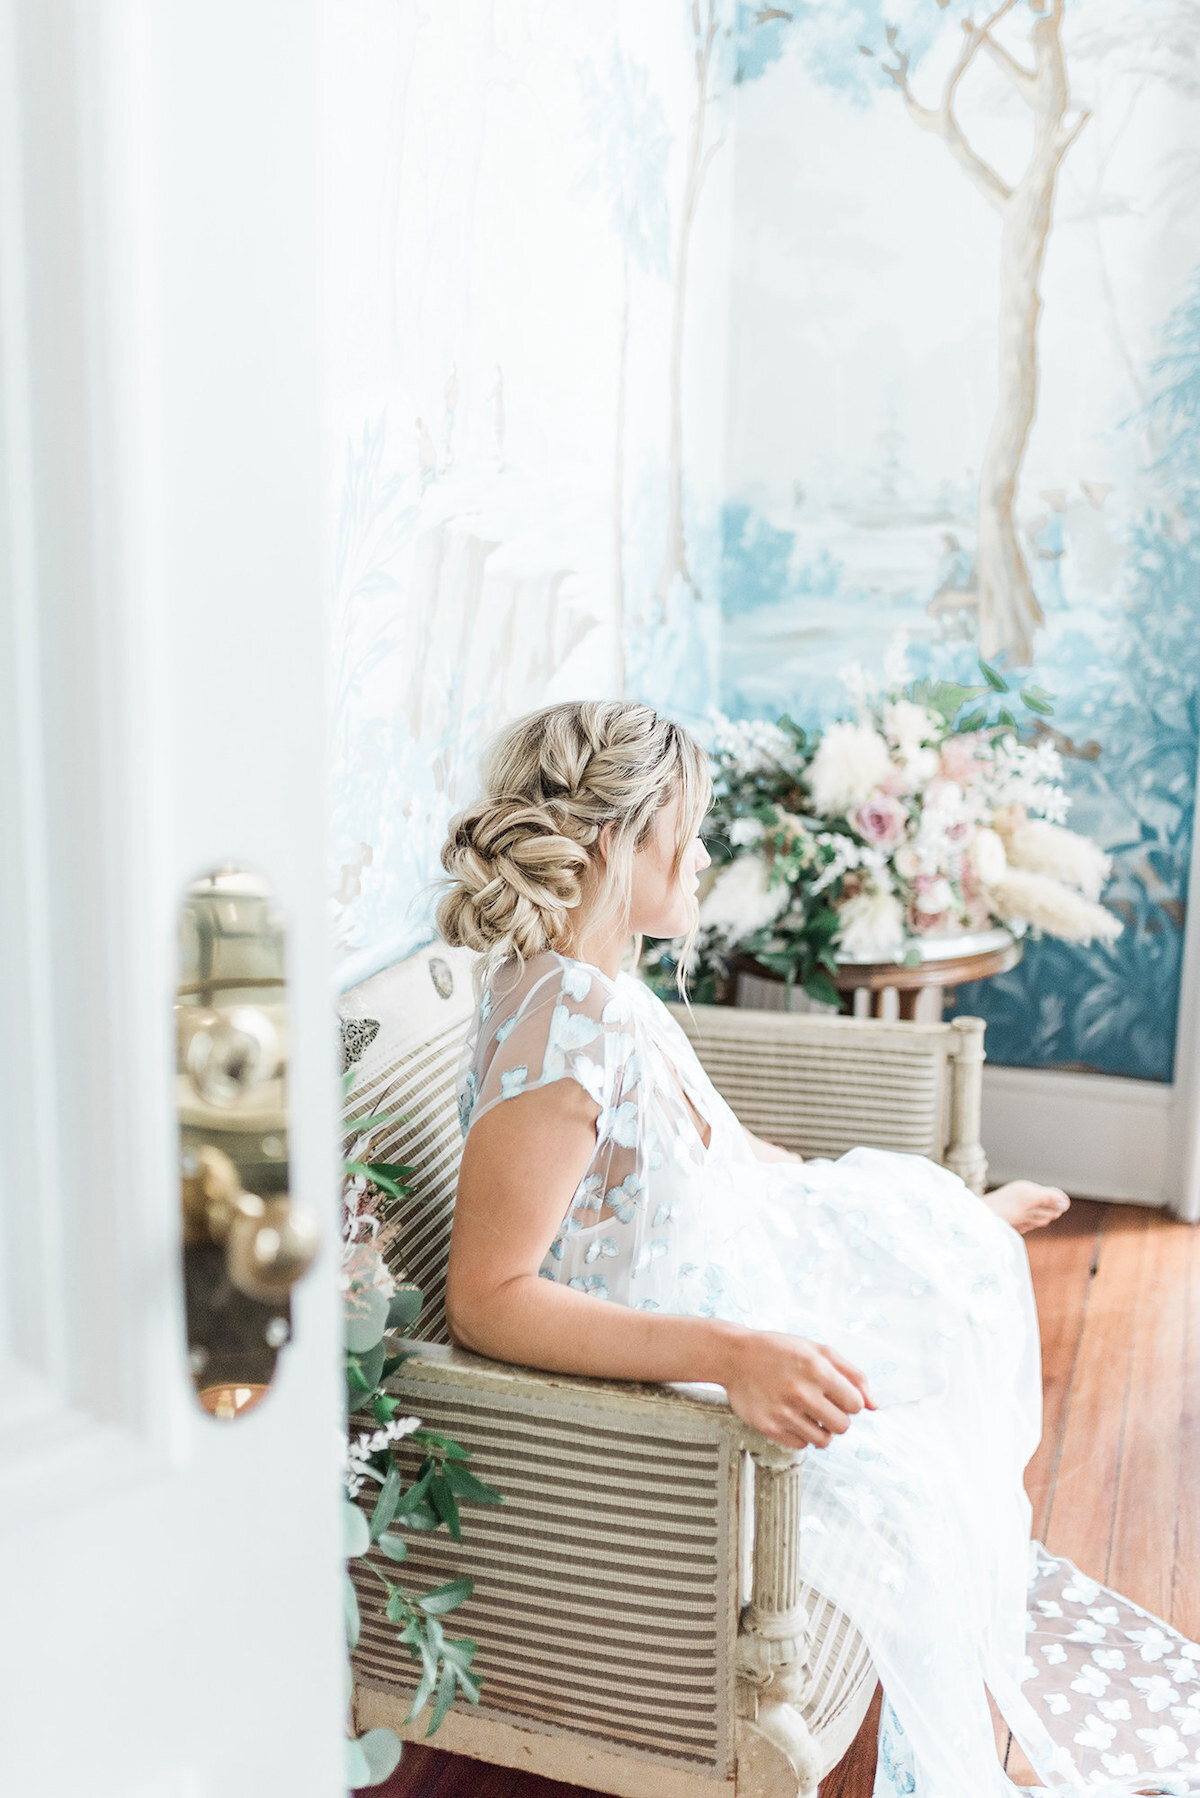 Step into a world of artful visions with our couture bridal photography. Each frame tells a story of high-end fashion, where creativity meets elegance in every stitch and design.